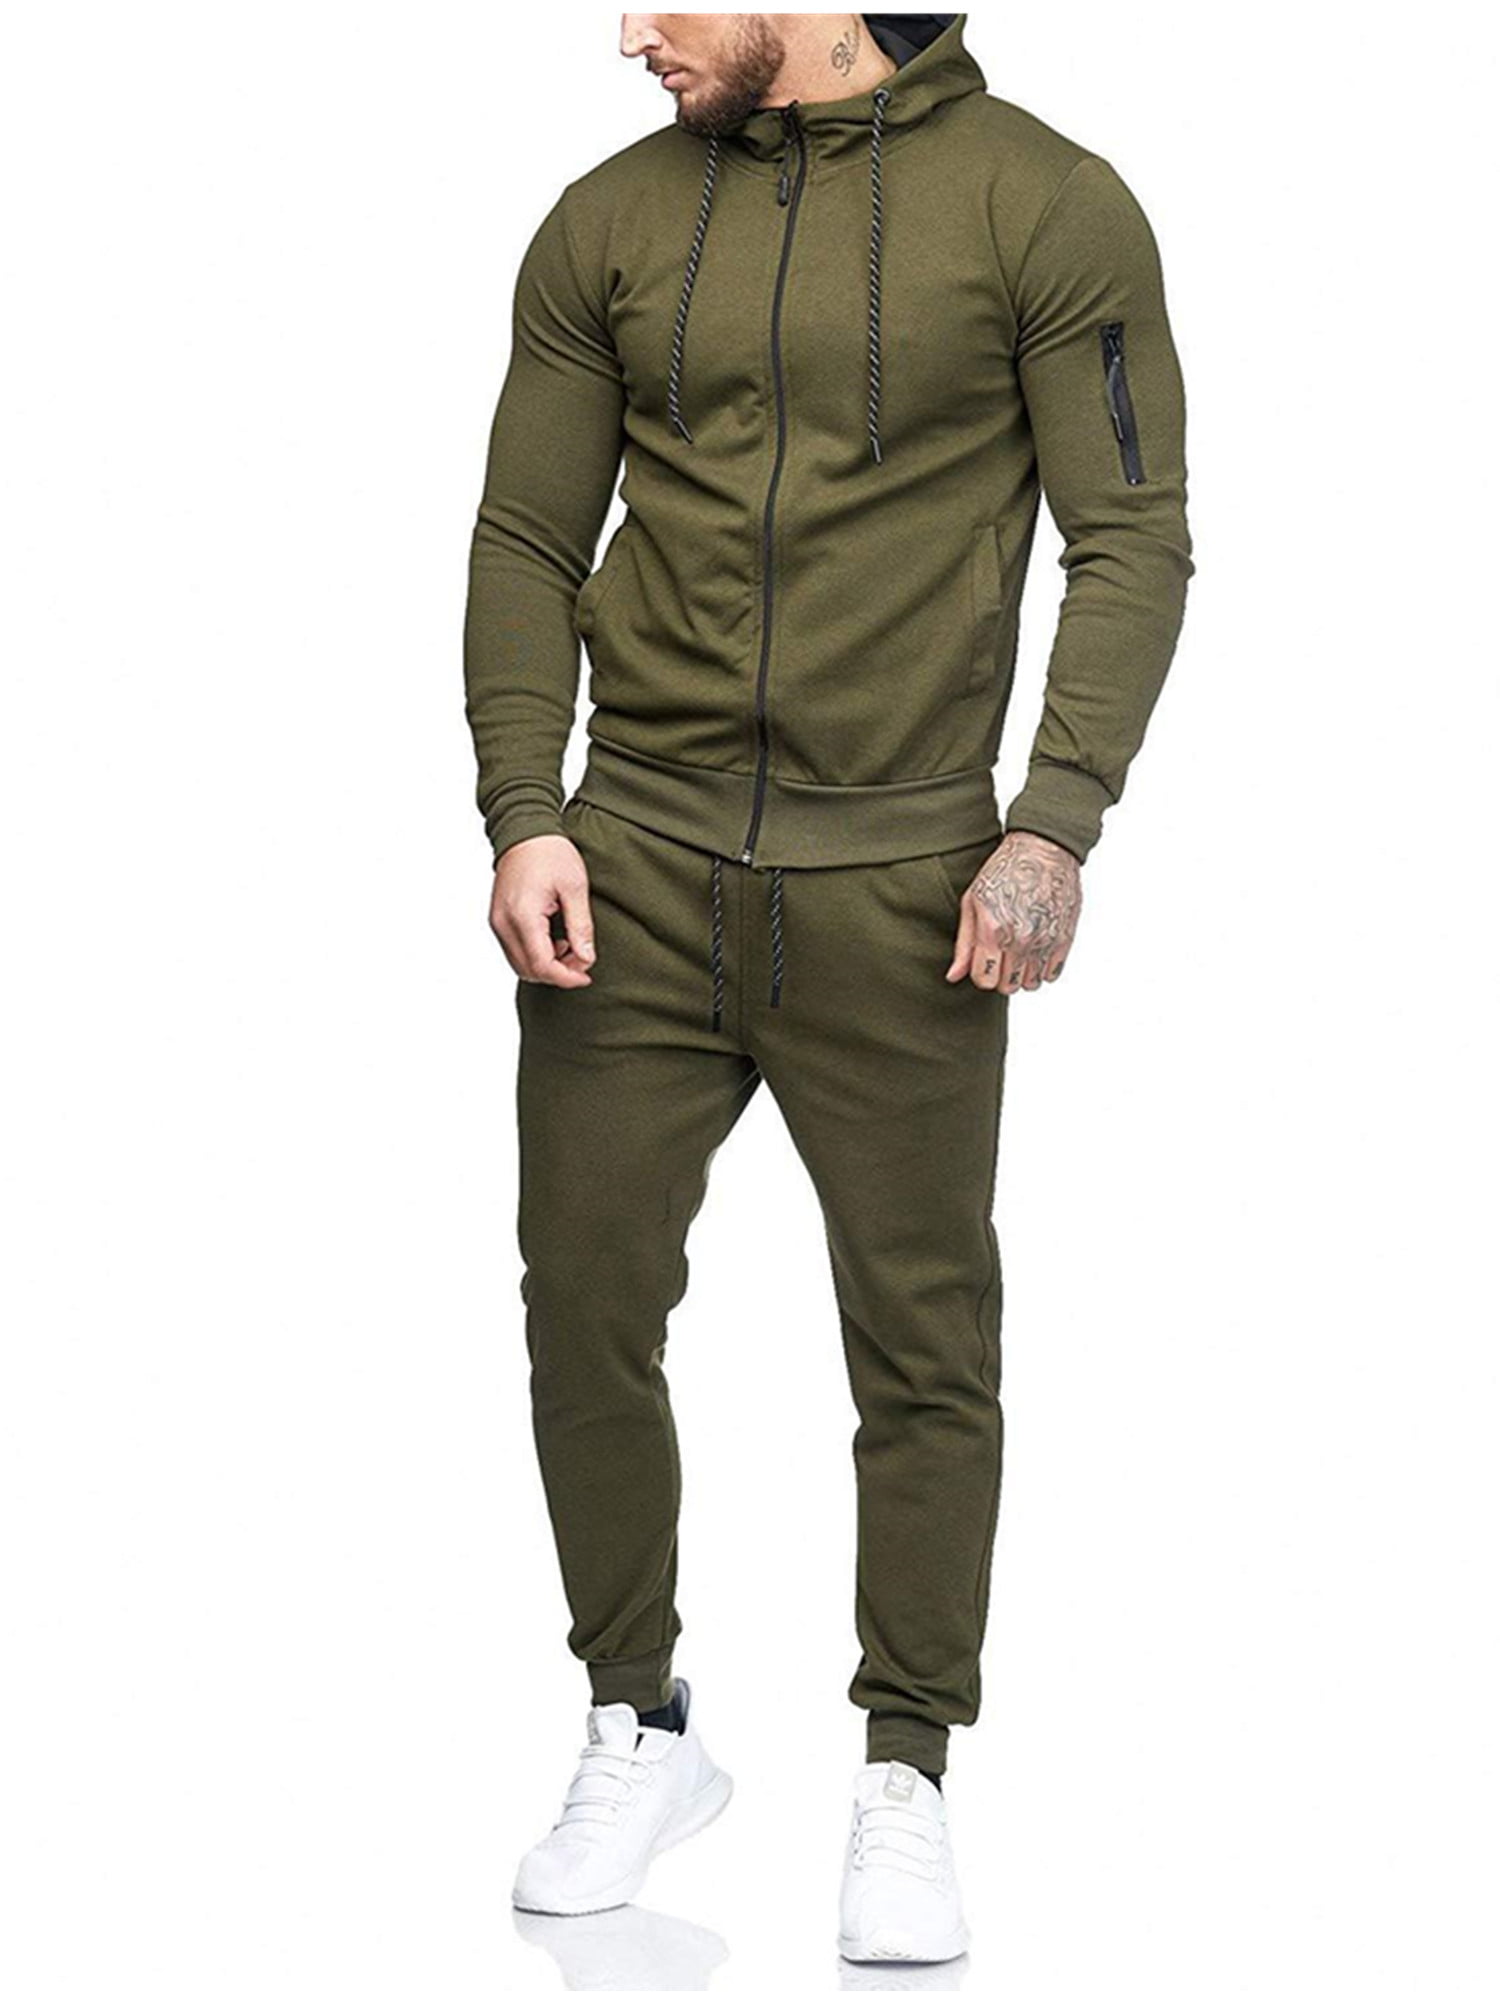 NY Deluxe Edition Mens Fleece Hooded TOP & Bottom Gym Jogger Plain Tracksuit Full Set S to XL